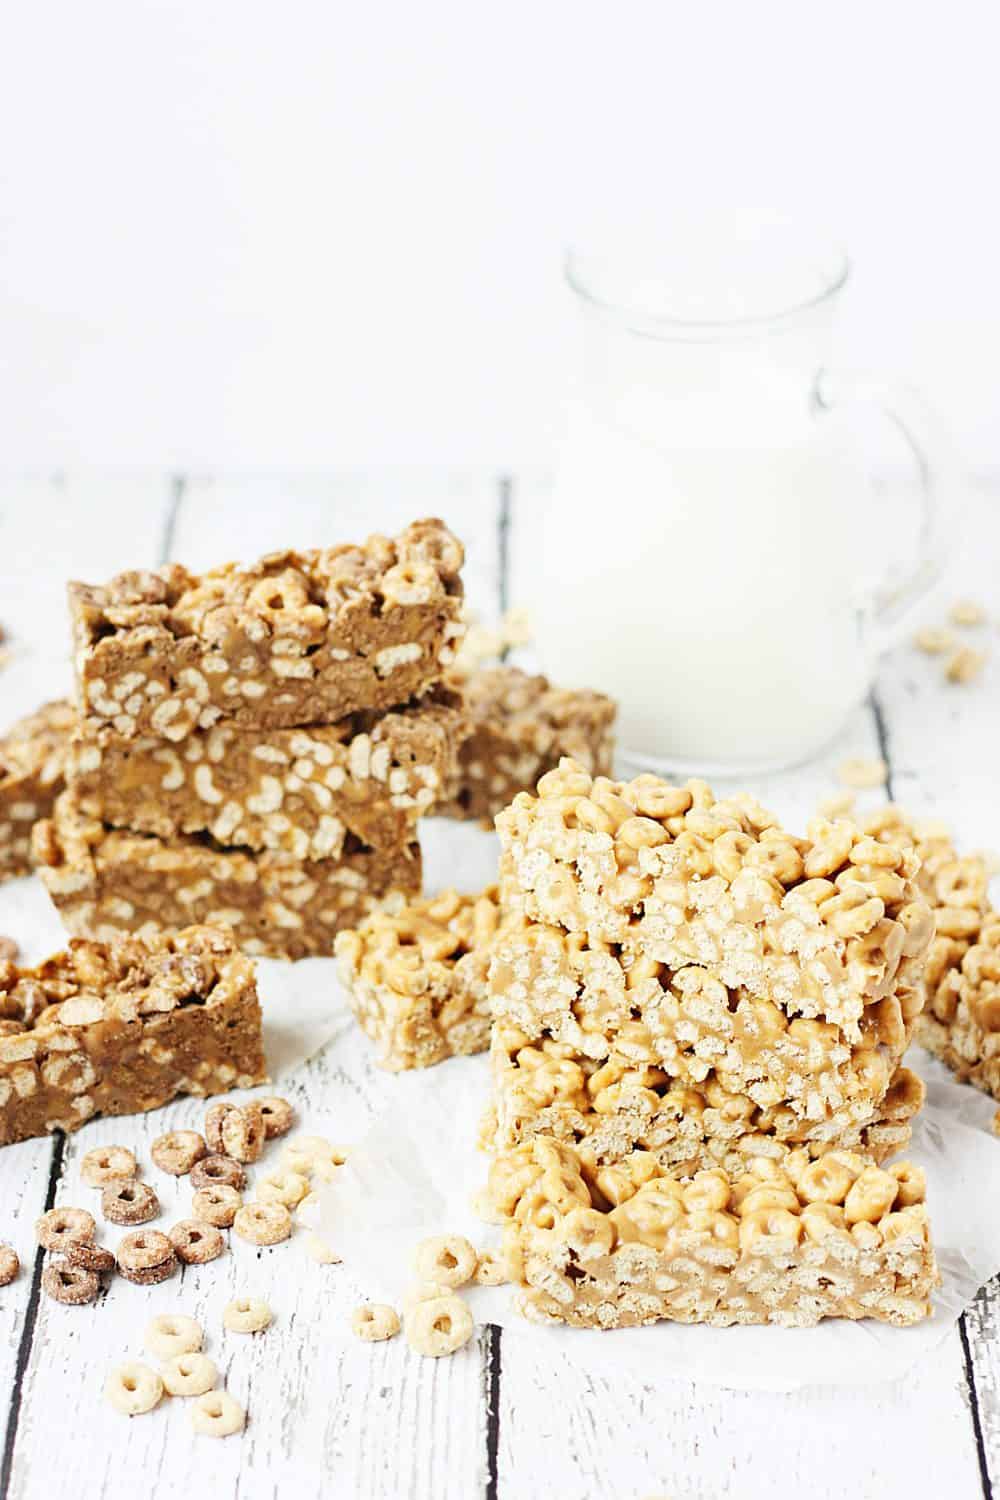 Easy No-Bake Cereal Bars -- Easy no-bake cereal bars take about 5 minutes to make and require only three ingredients: cereal, peanut butter, and honey. Perfect as an on-the-go breakfast or afternoon snack! | #recipes #breakfast